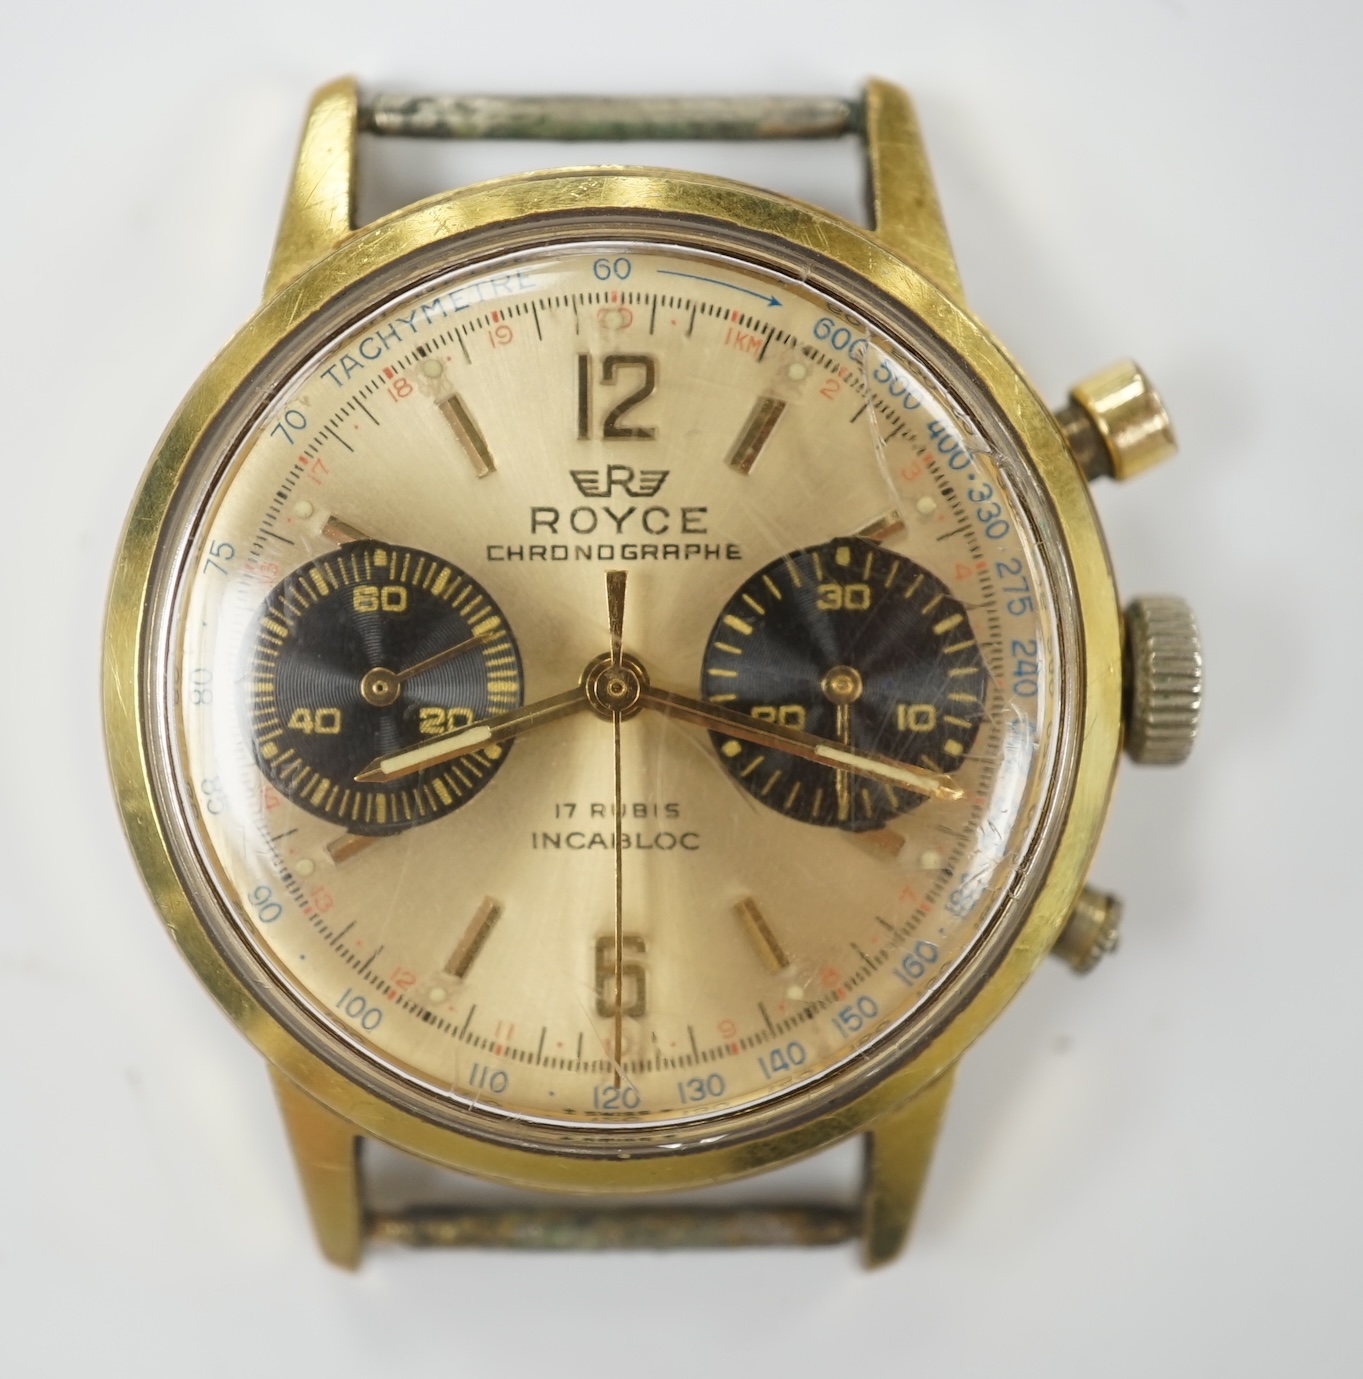 A gentleman's steel and gold plated Royce Chronograph manual wind wrist watch, with baton and quarterly Arabic numerals and two subsidiary dials, case diameter 36mm, no strap.